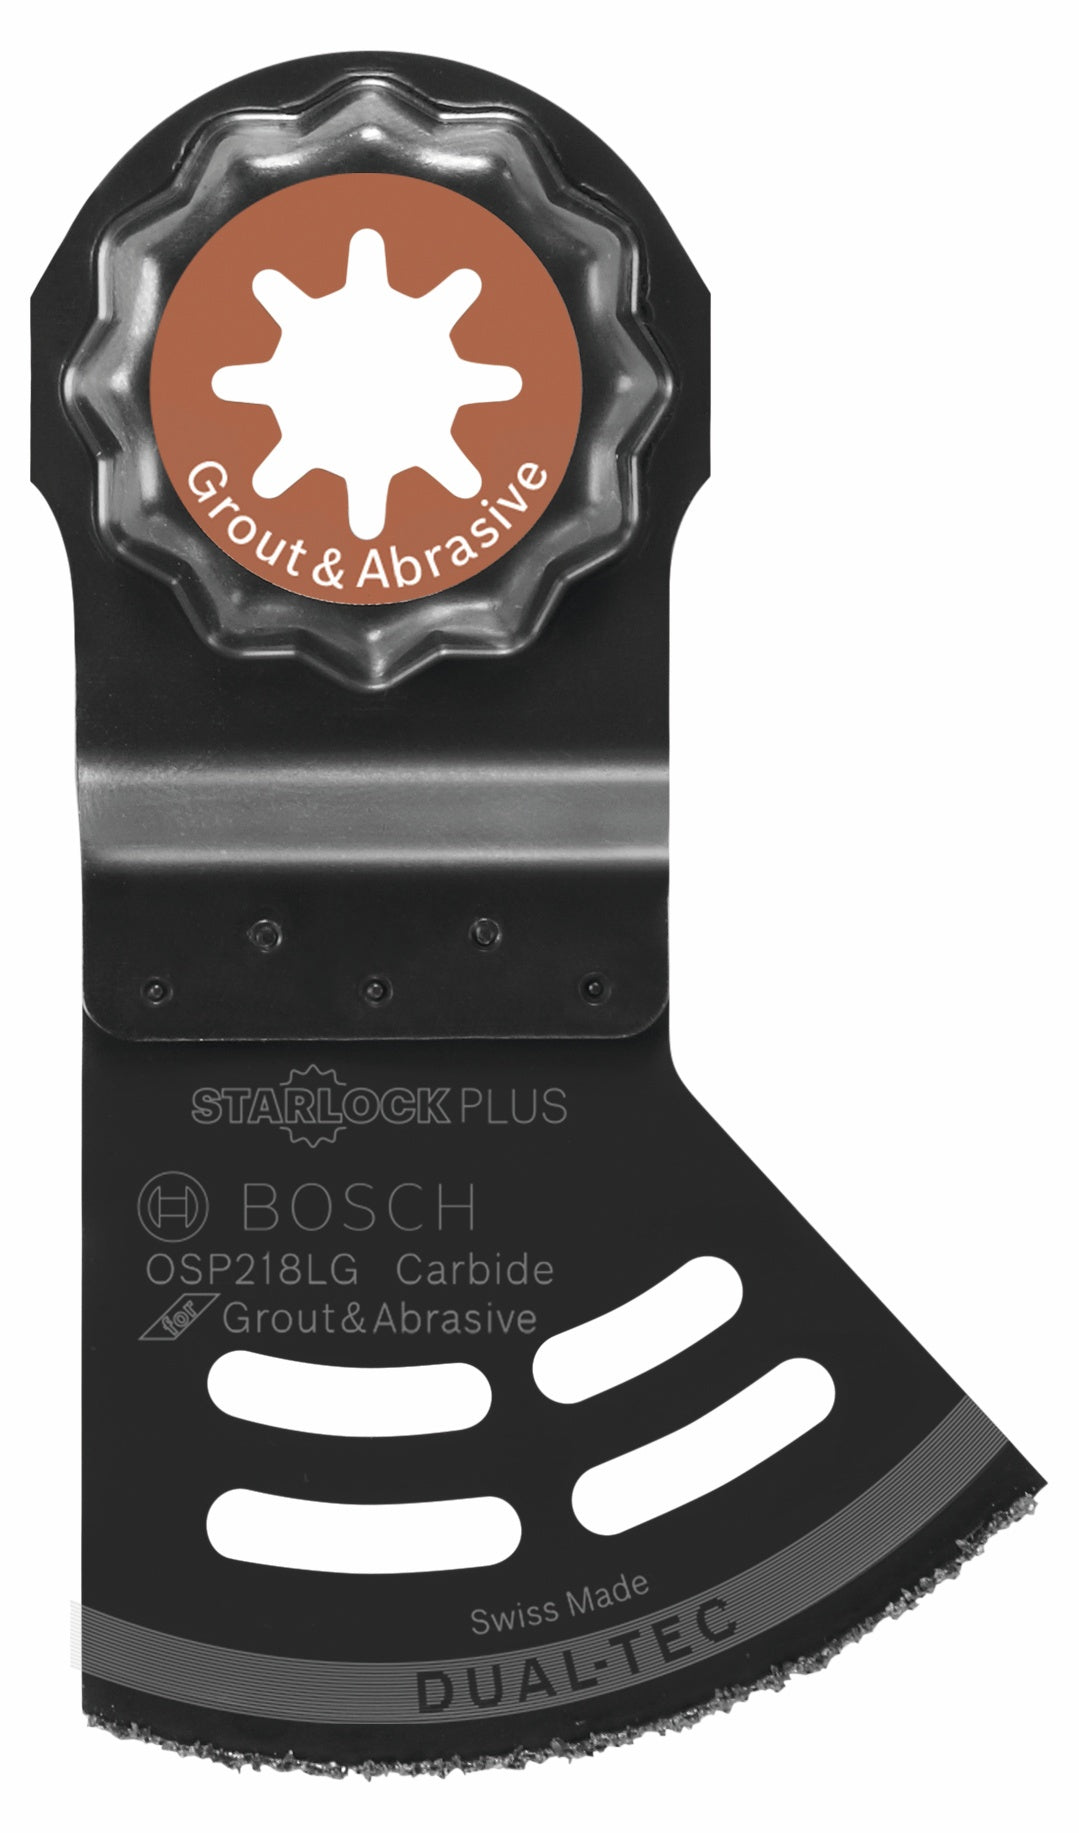 BOSCH 2-1/8" StarlockPlus® Oscillating Multi-Tool 2-in-1 Dual-Tec Grout and Abrasive Blade